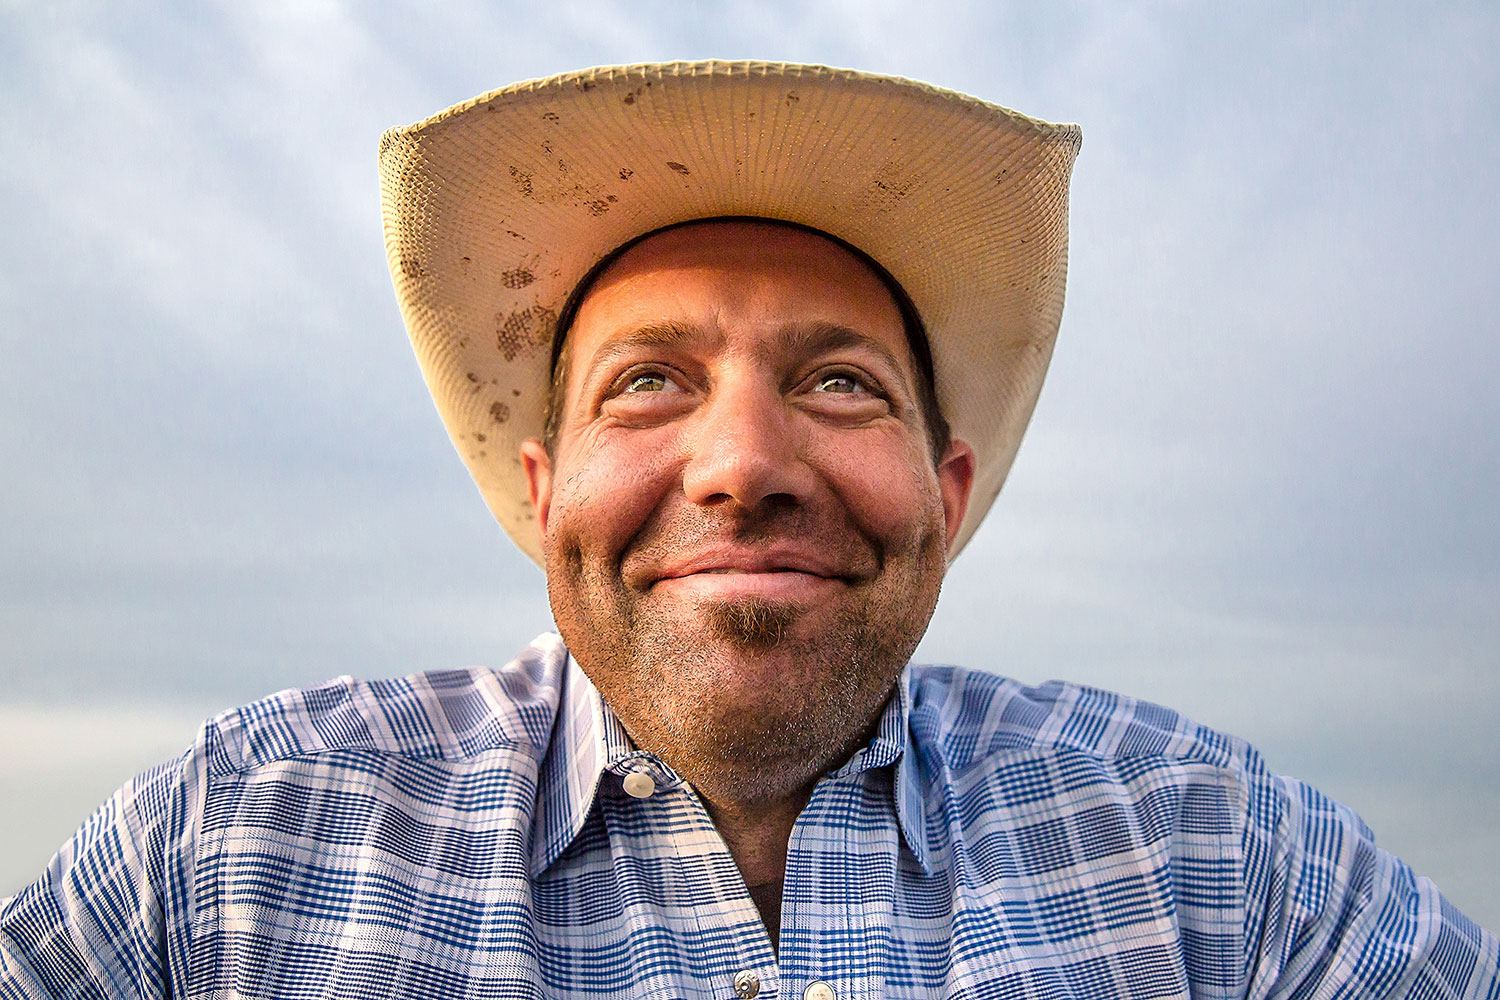 How to piss off a professional rodeo photographer (unknowingly) in 12 easy steps